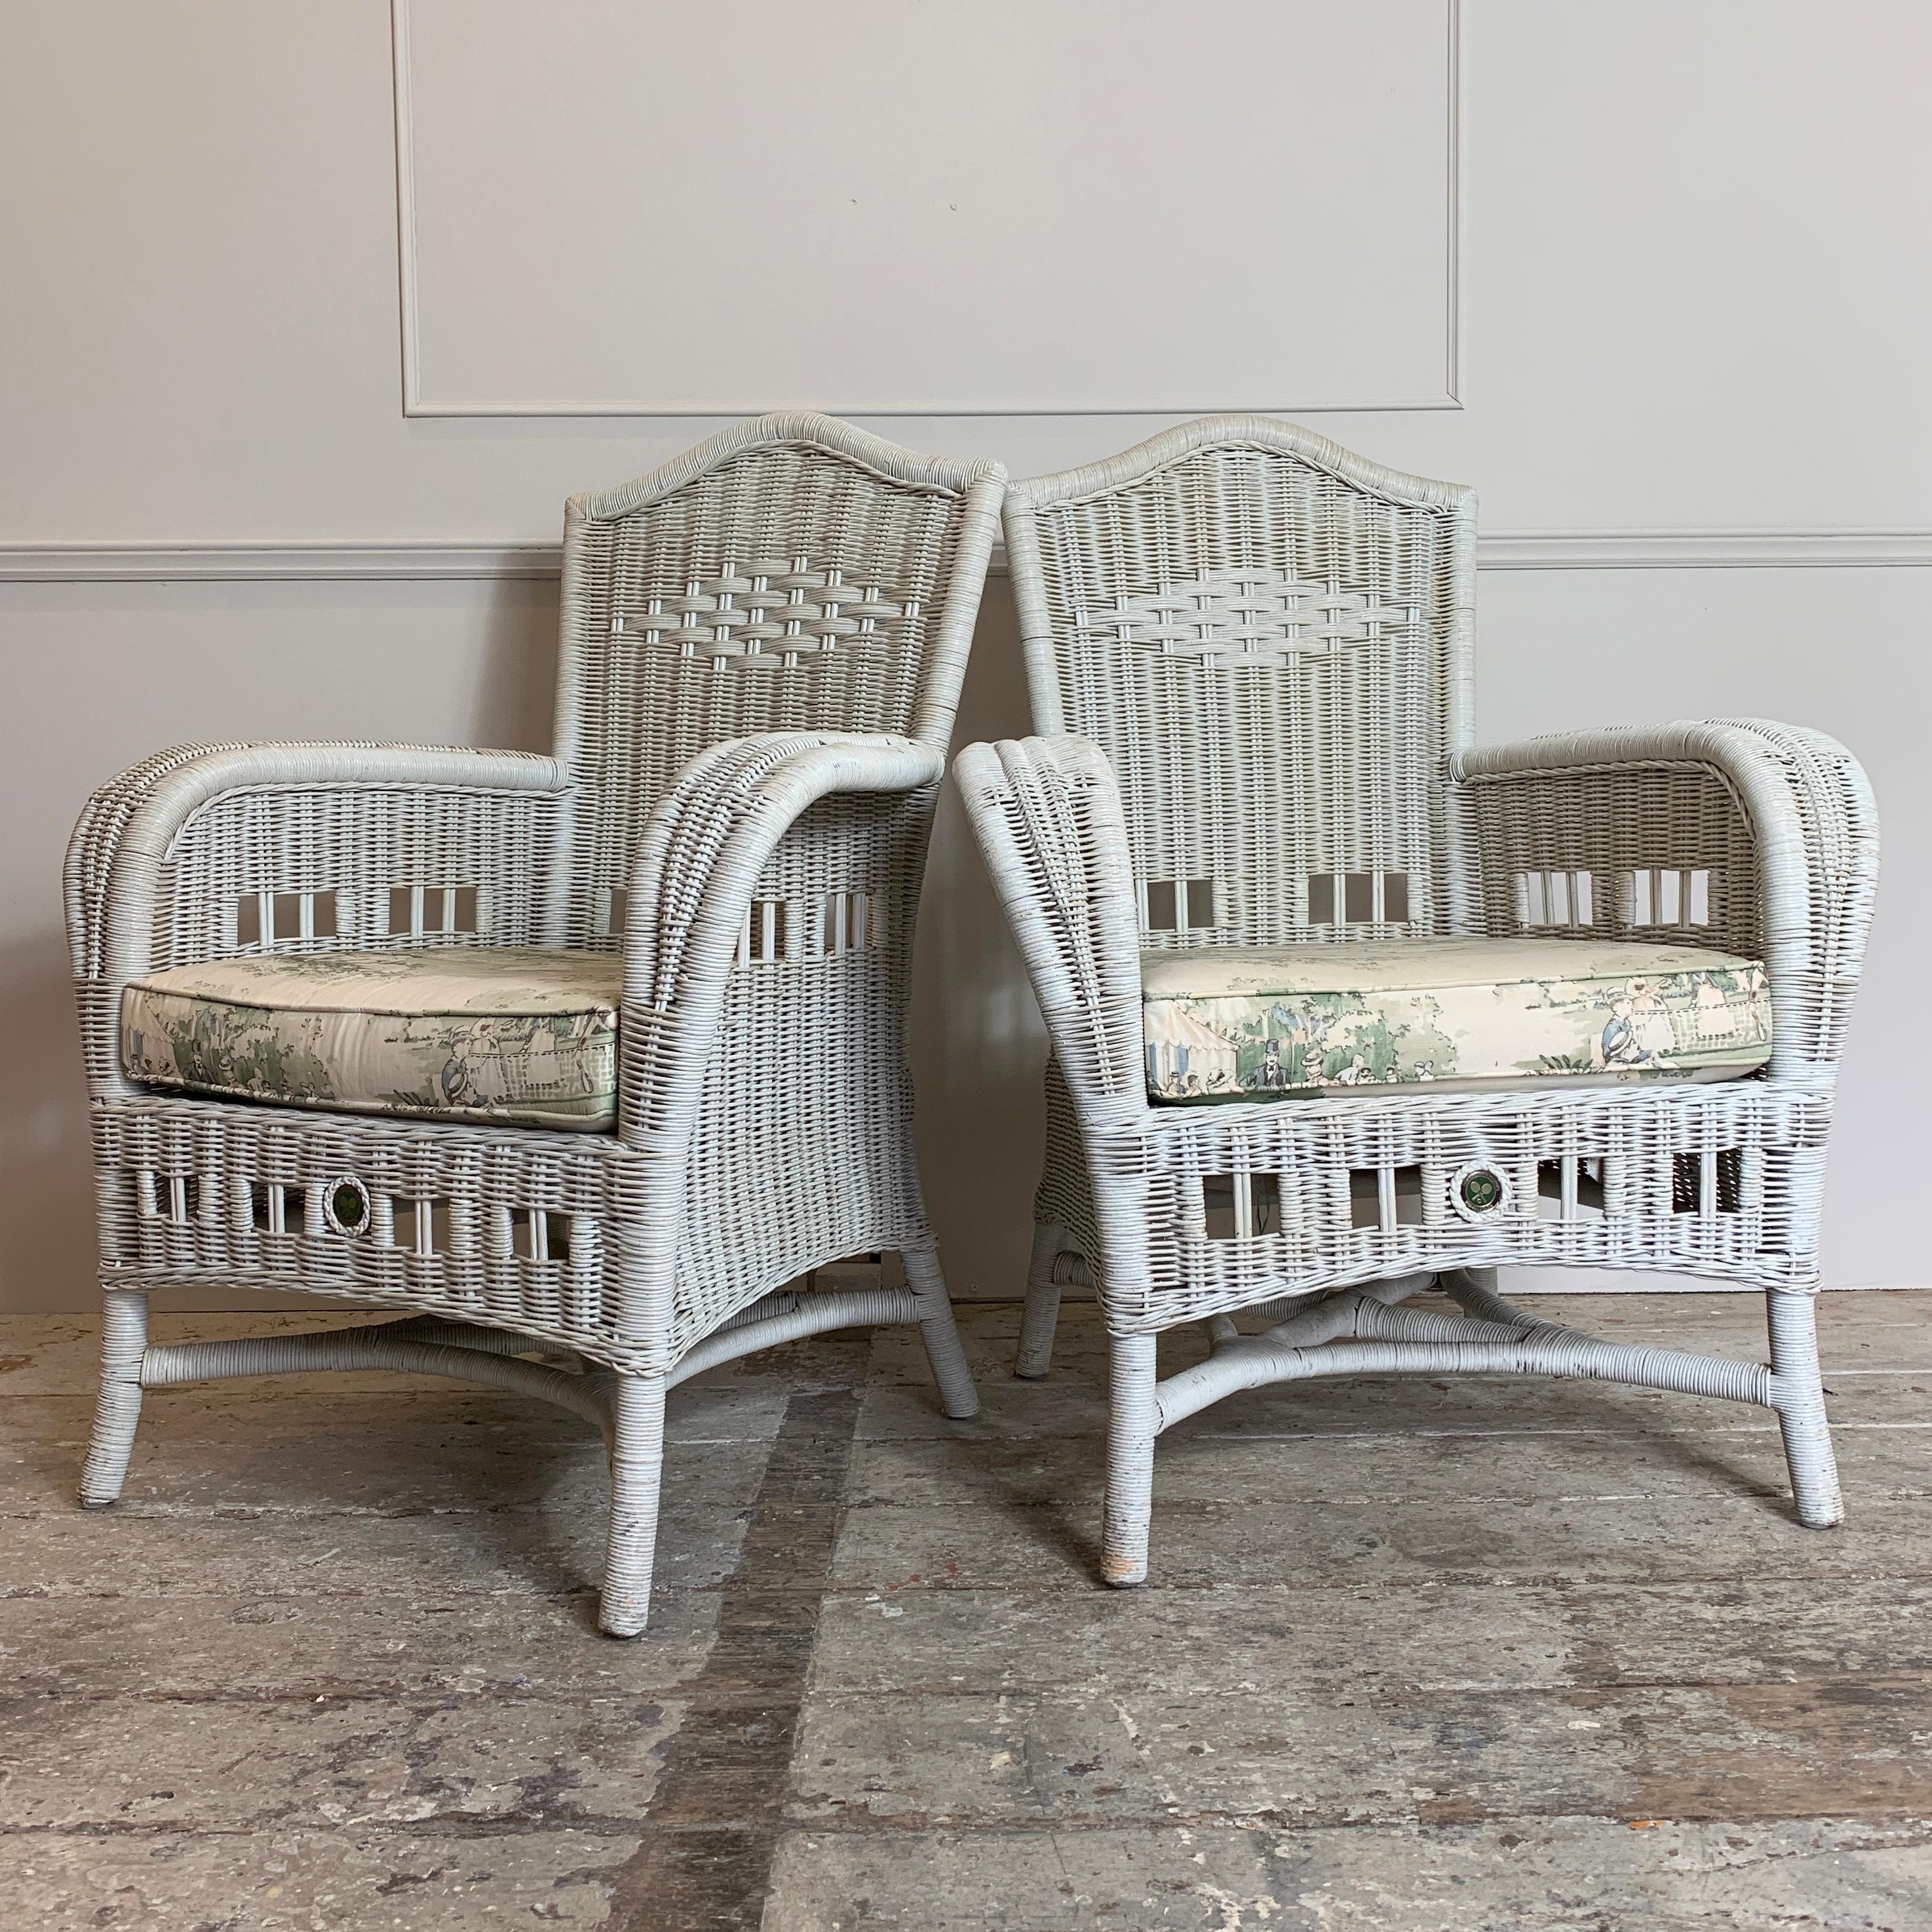 Henry Link, Wicker Chairs from Wimbledon Lawn Tennis Club, London 2